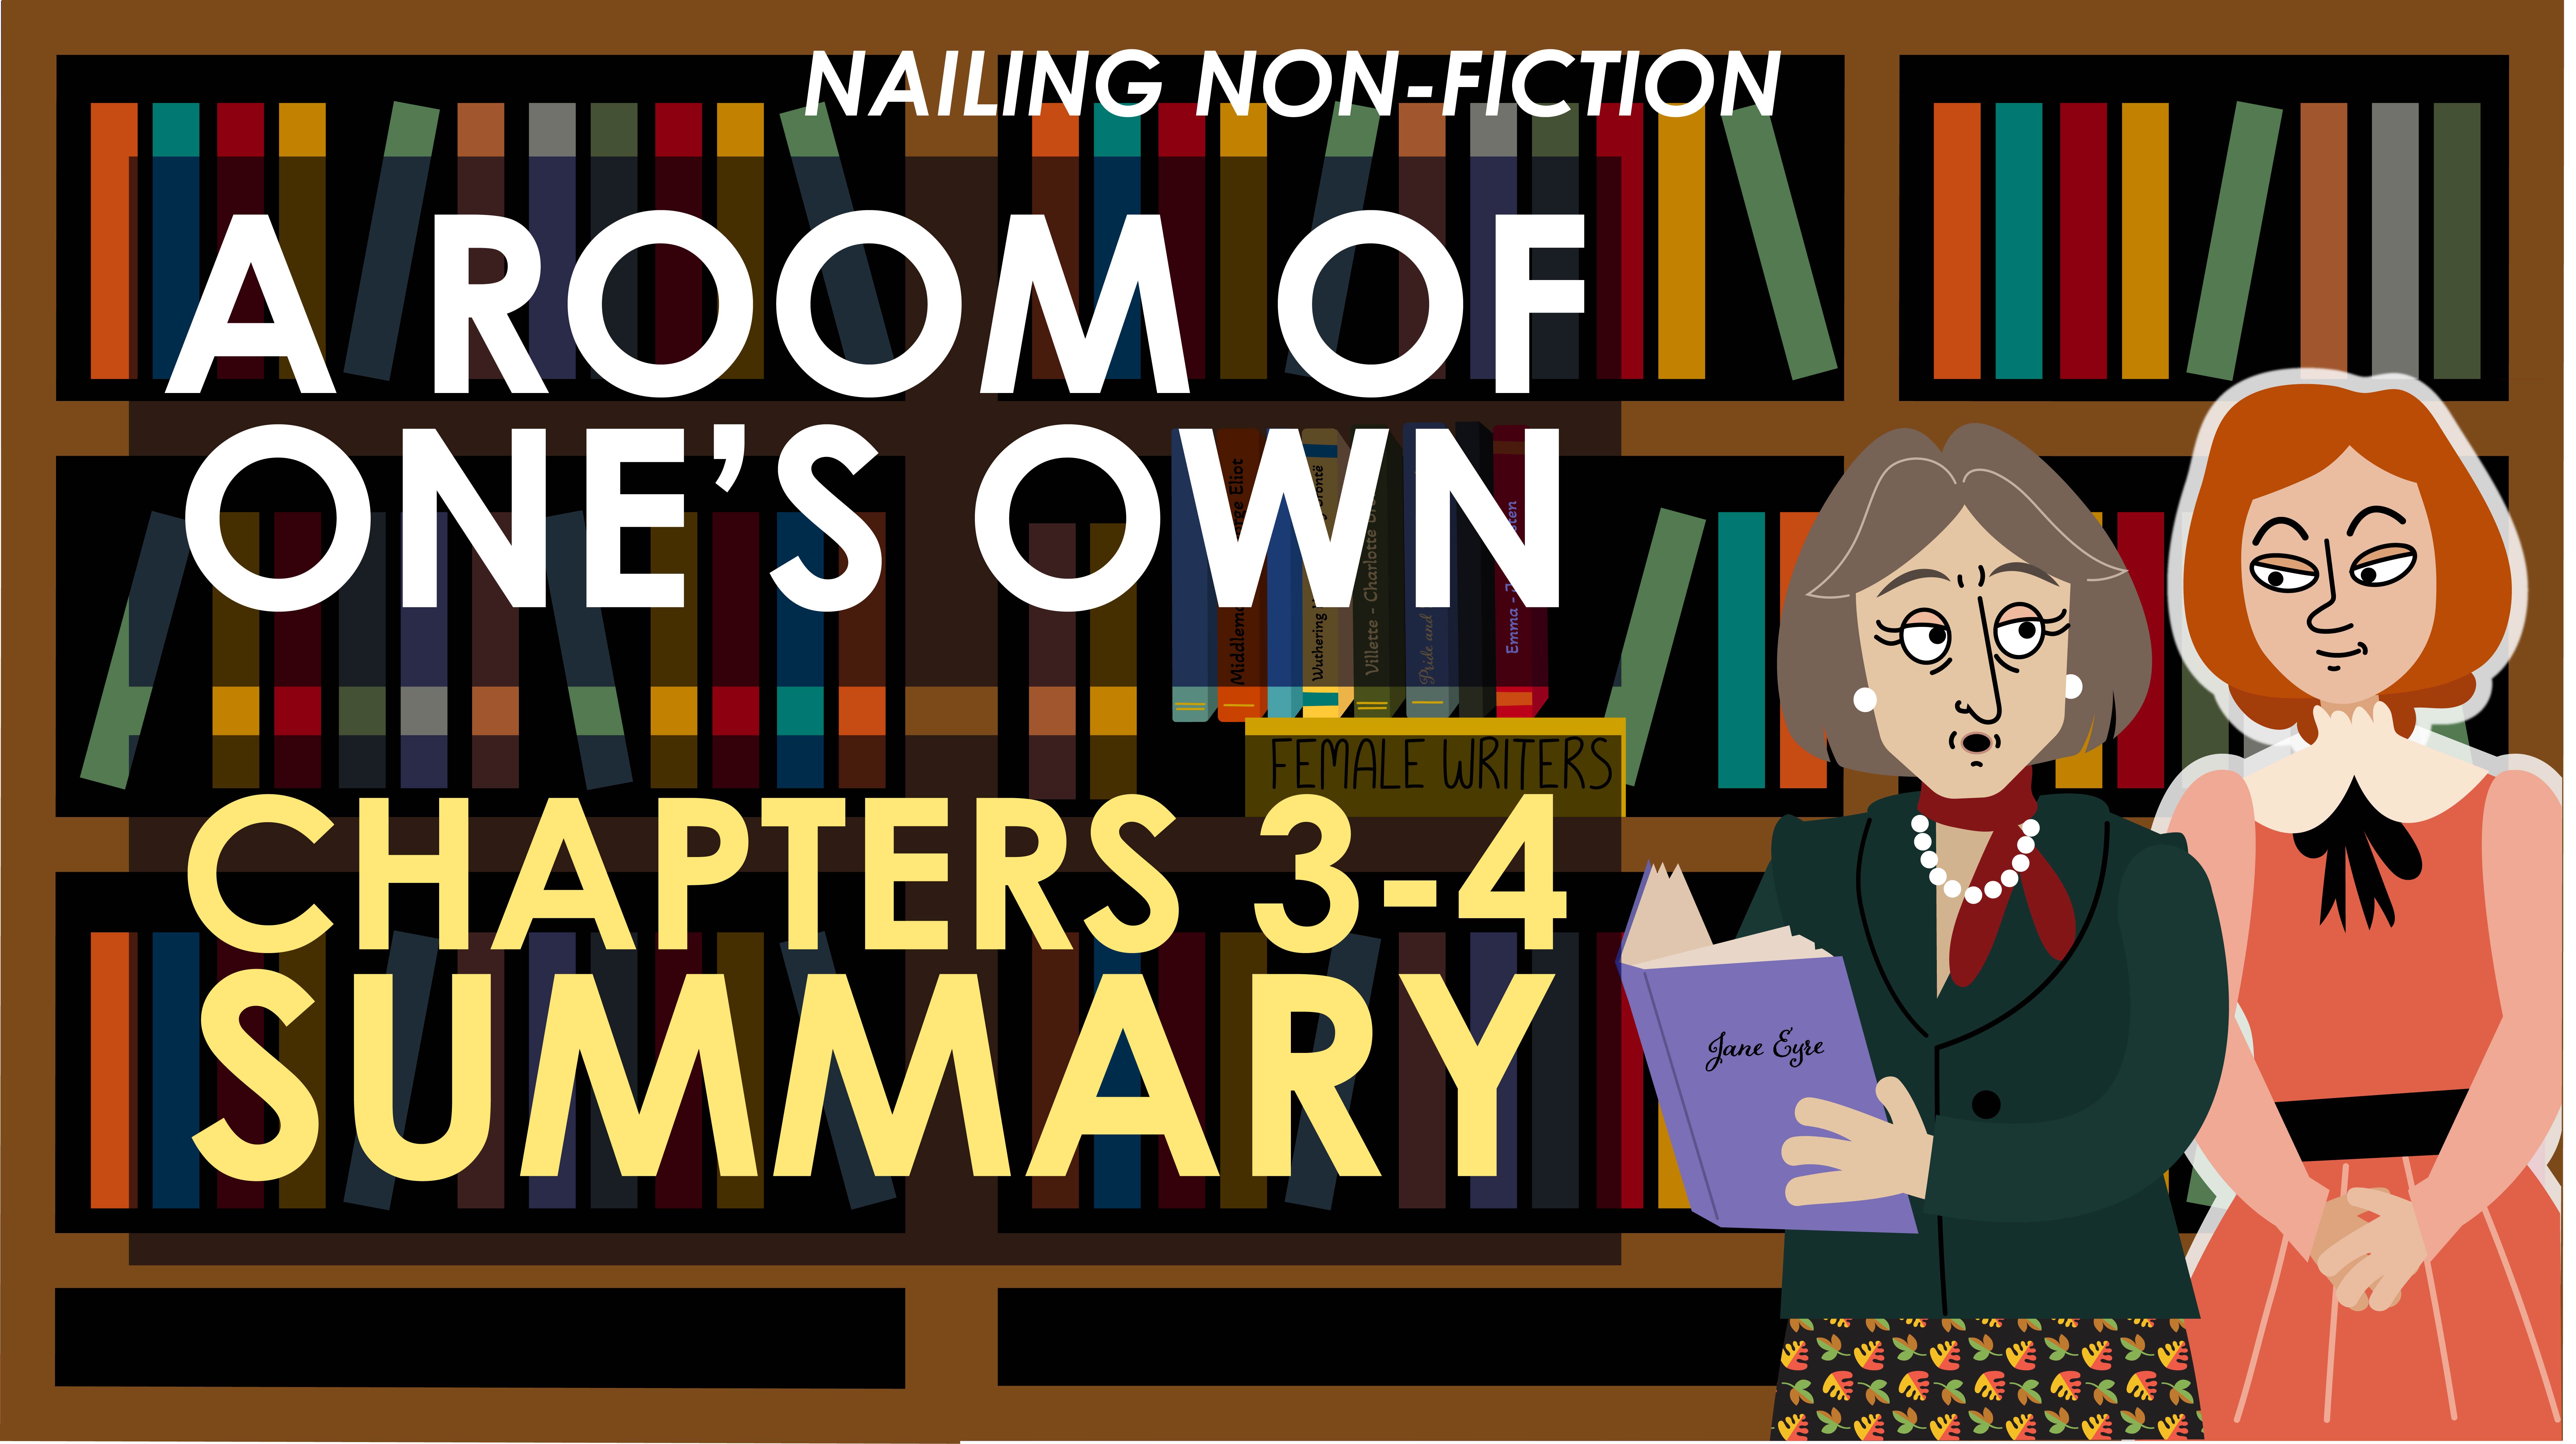 A Room of One's Own - Chapters 3-4 Summary - Nailing Non-Fiction Series